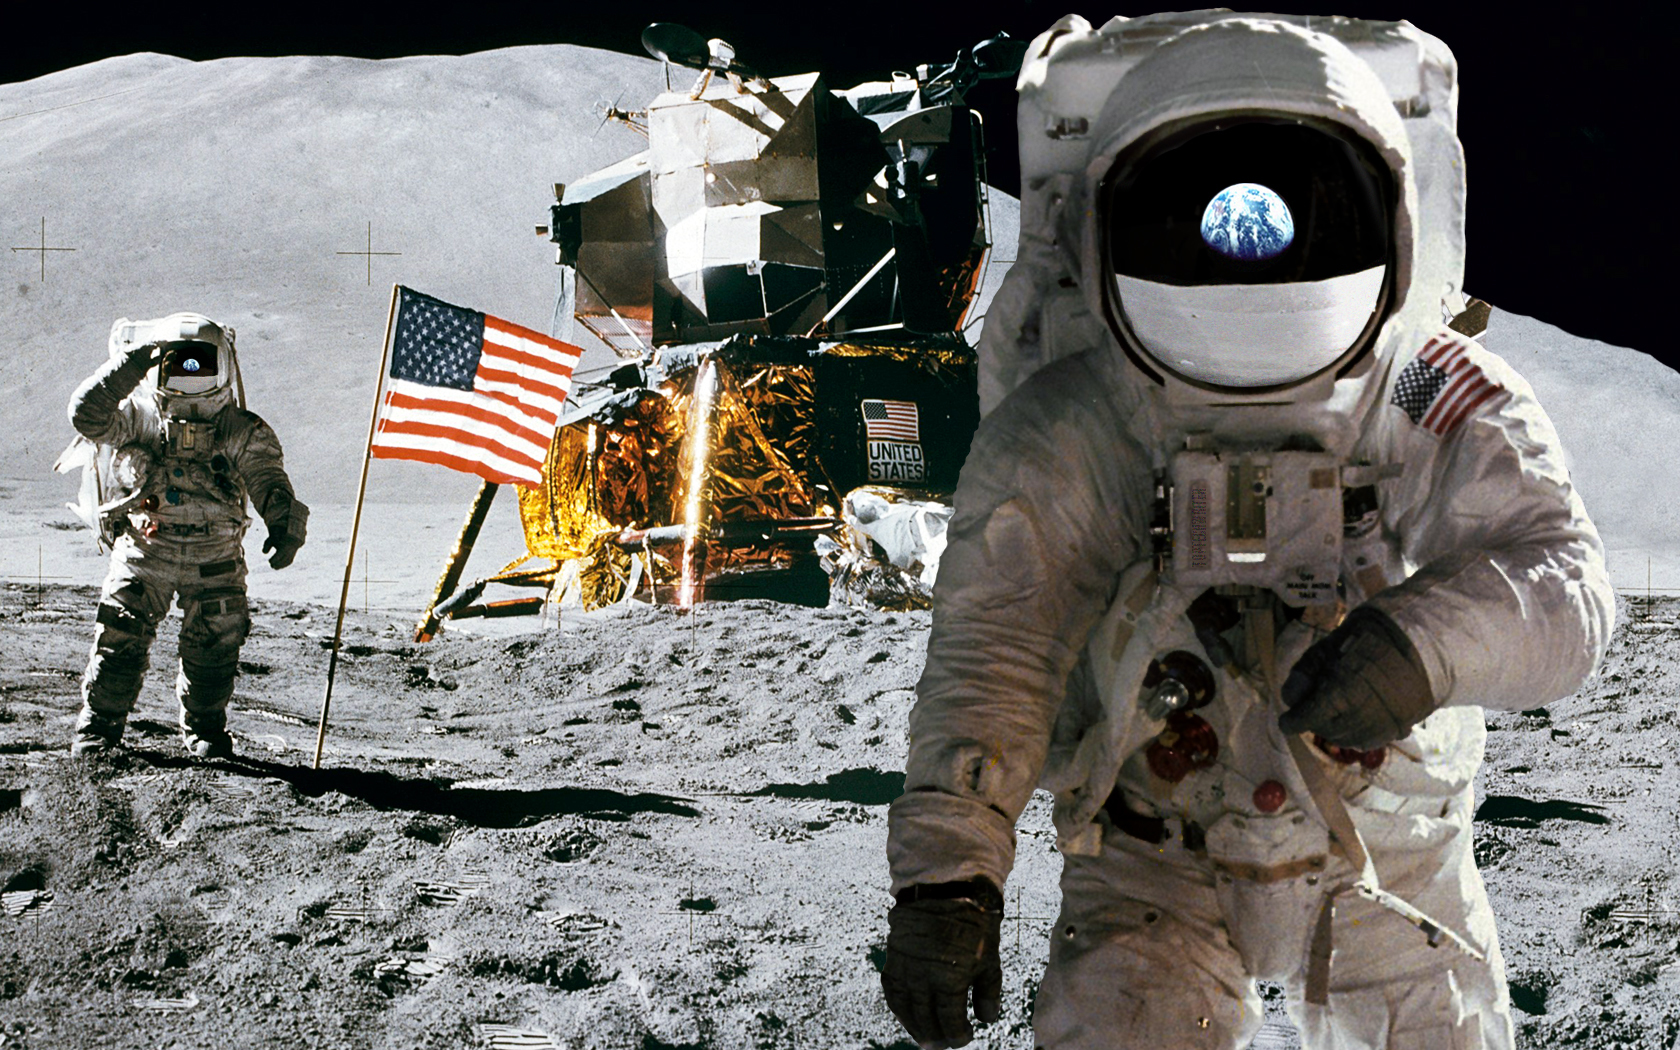 American astronauts on the moon wallpapers and images   wallpapers